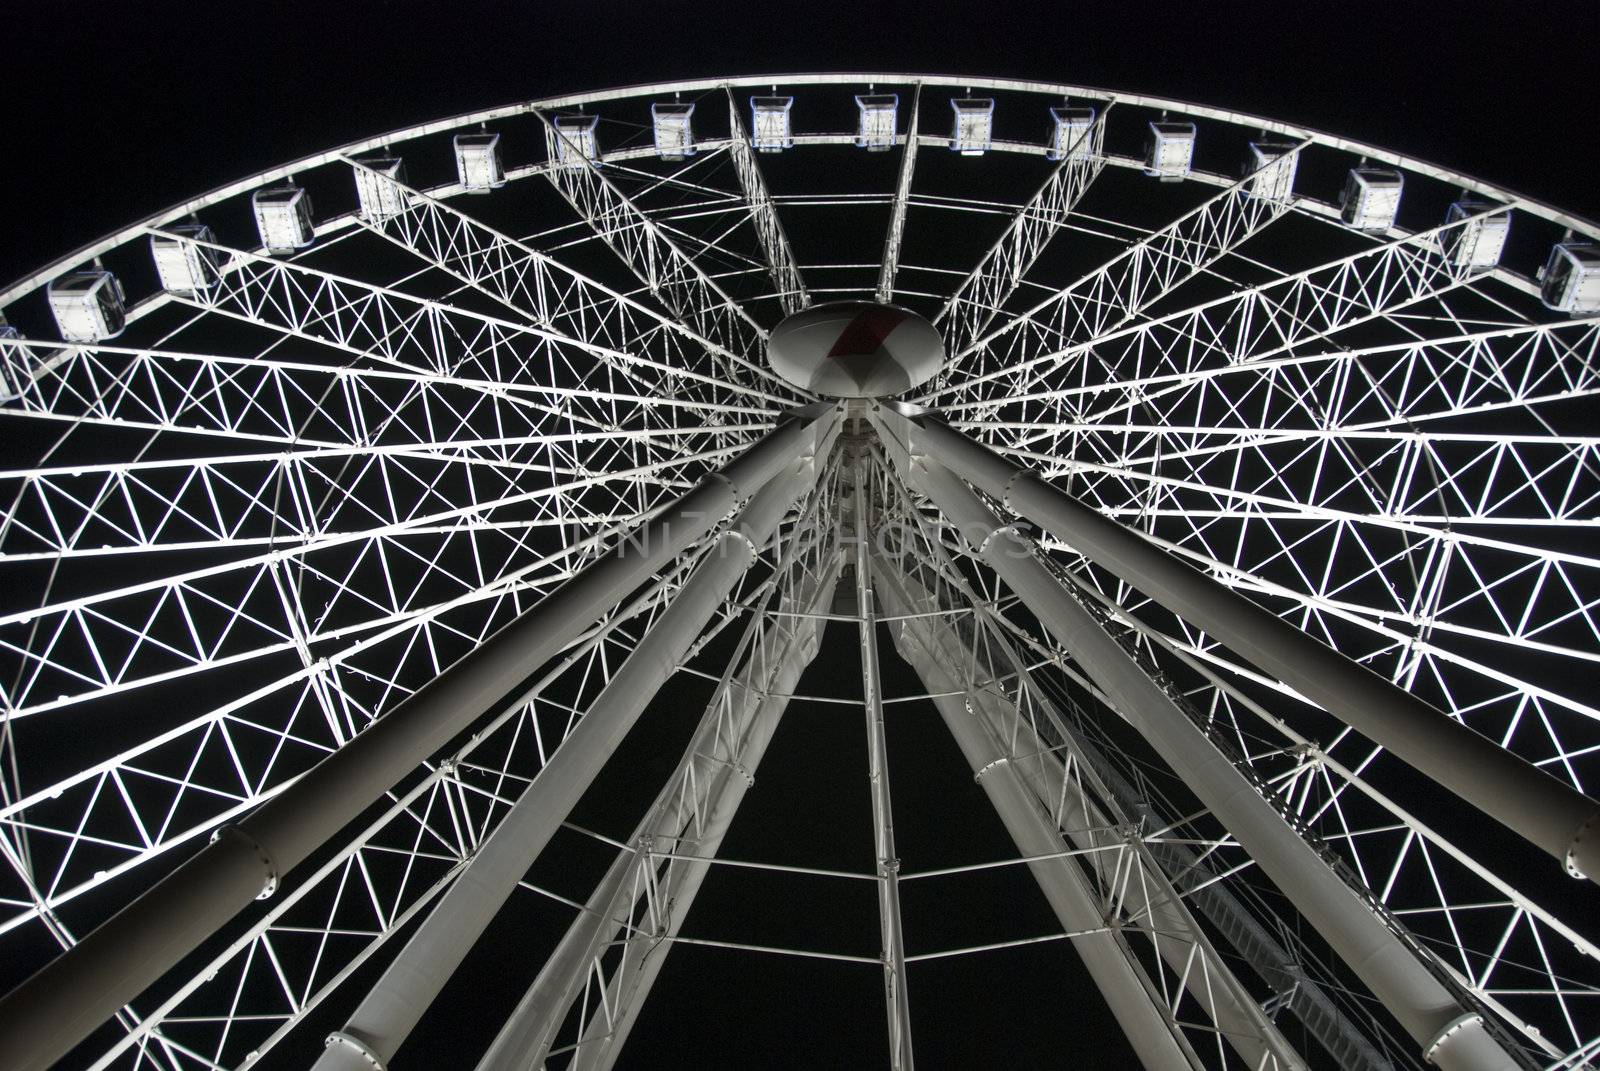 A strange view of the wheel in the night of Brisbane